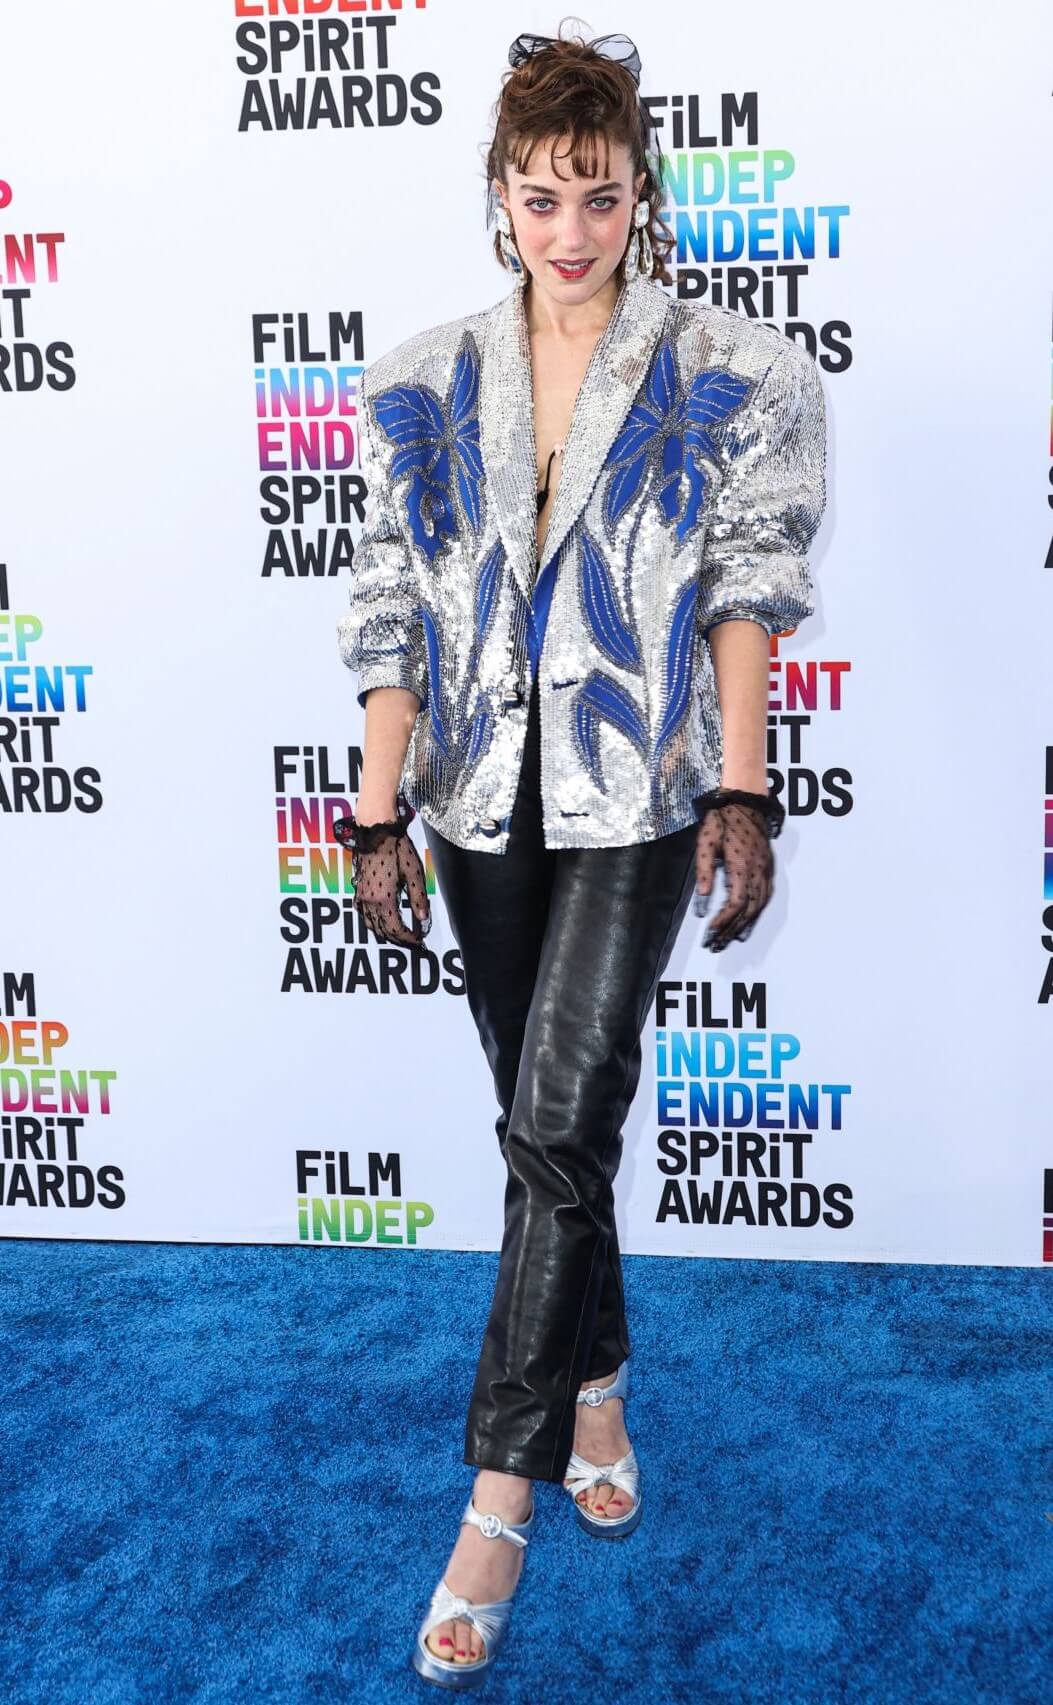 Beatrice Granno In Shimmery Jacket With Leather Pants At Film Independent Spirit Awards